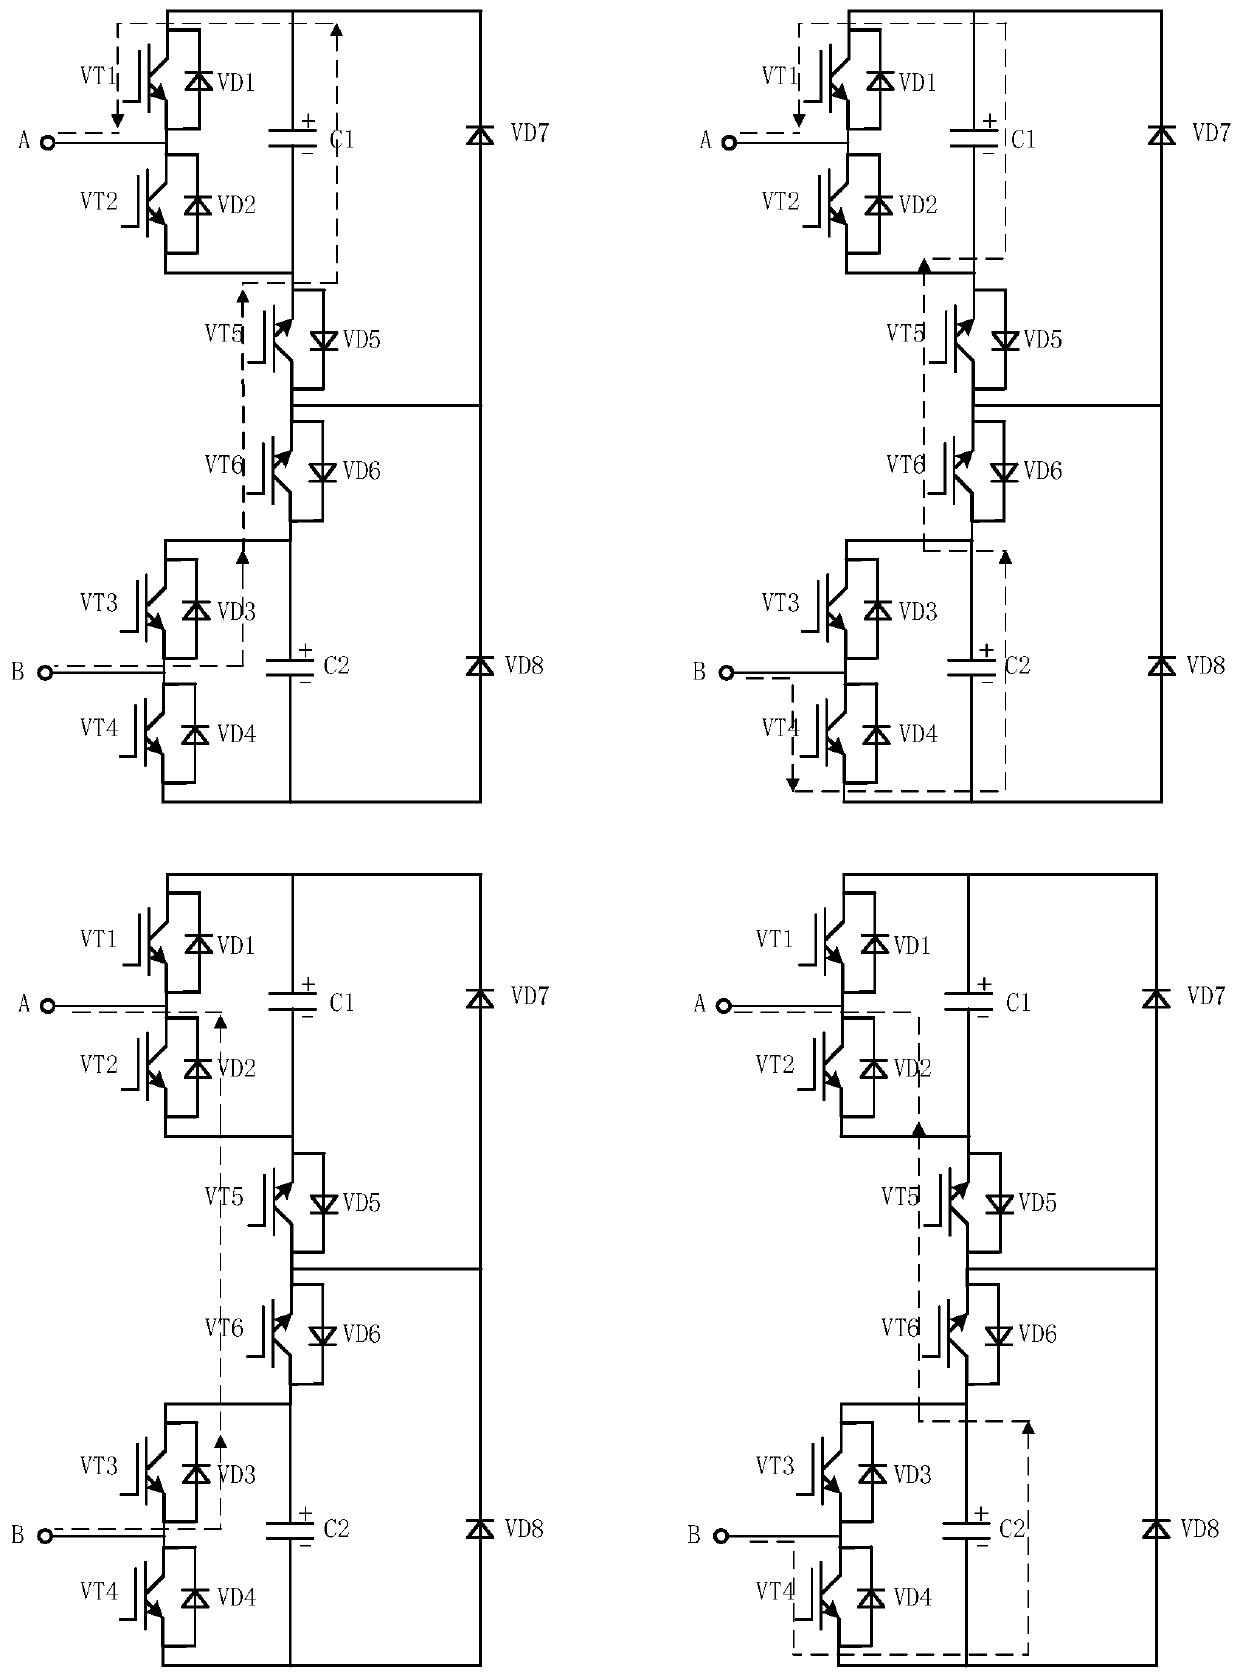 MMC sub-module topological structure with DC fault blocking capability equivalent to that of full-bridge sub-module